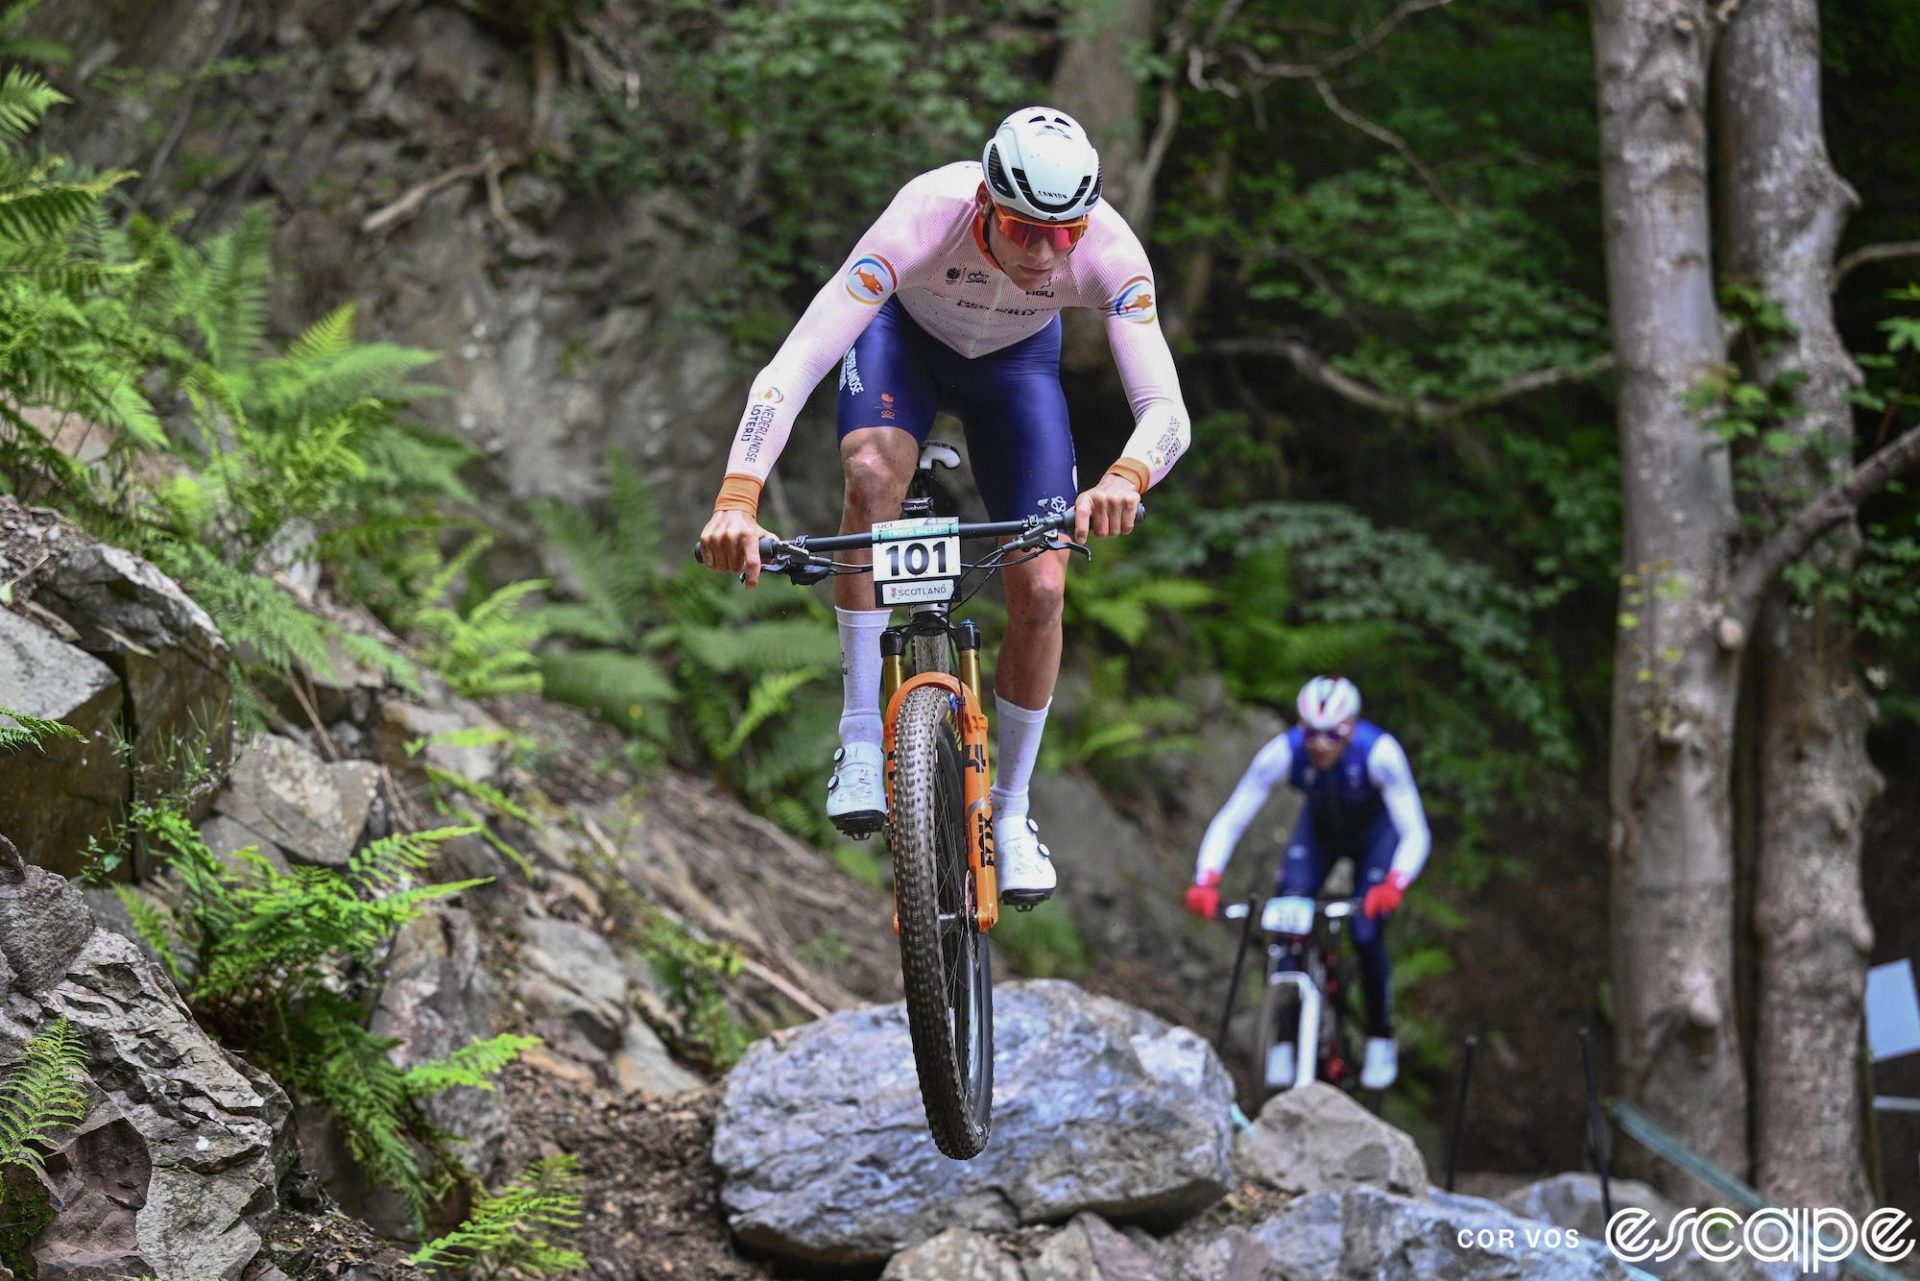 Mathieu van der Poel rides a rocky double jump in Glentress Forest in practice at the 2023 World MTB Championships.